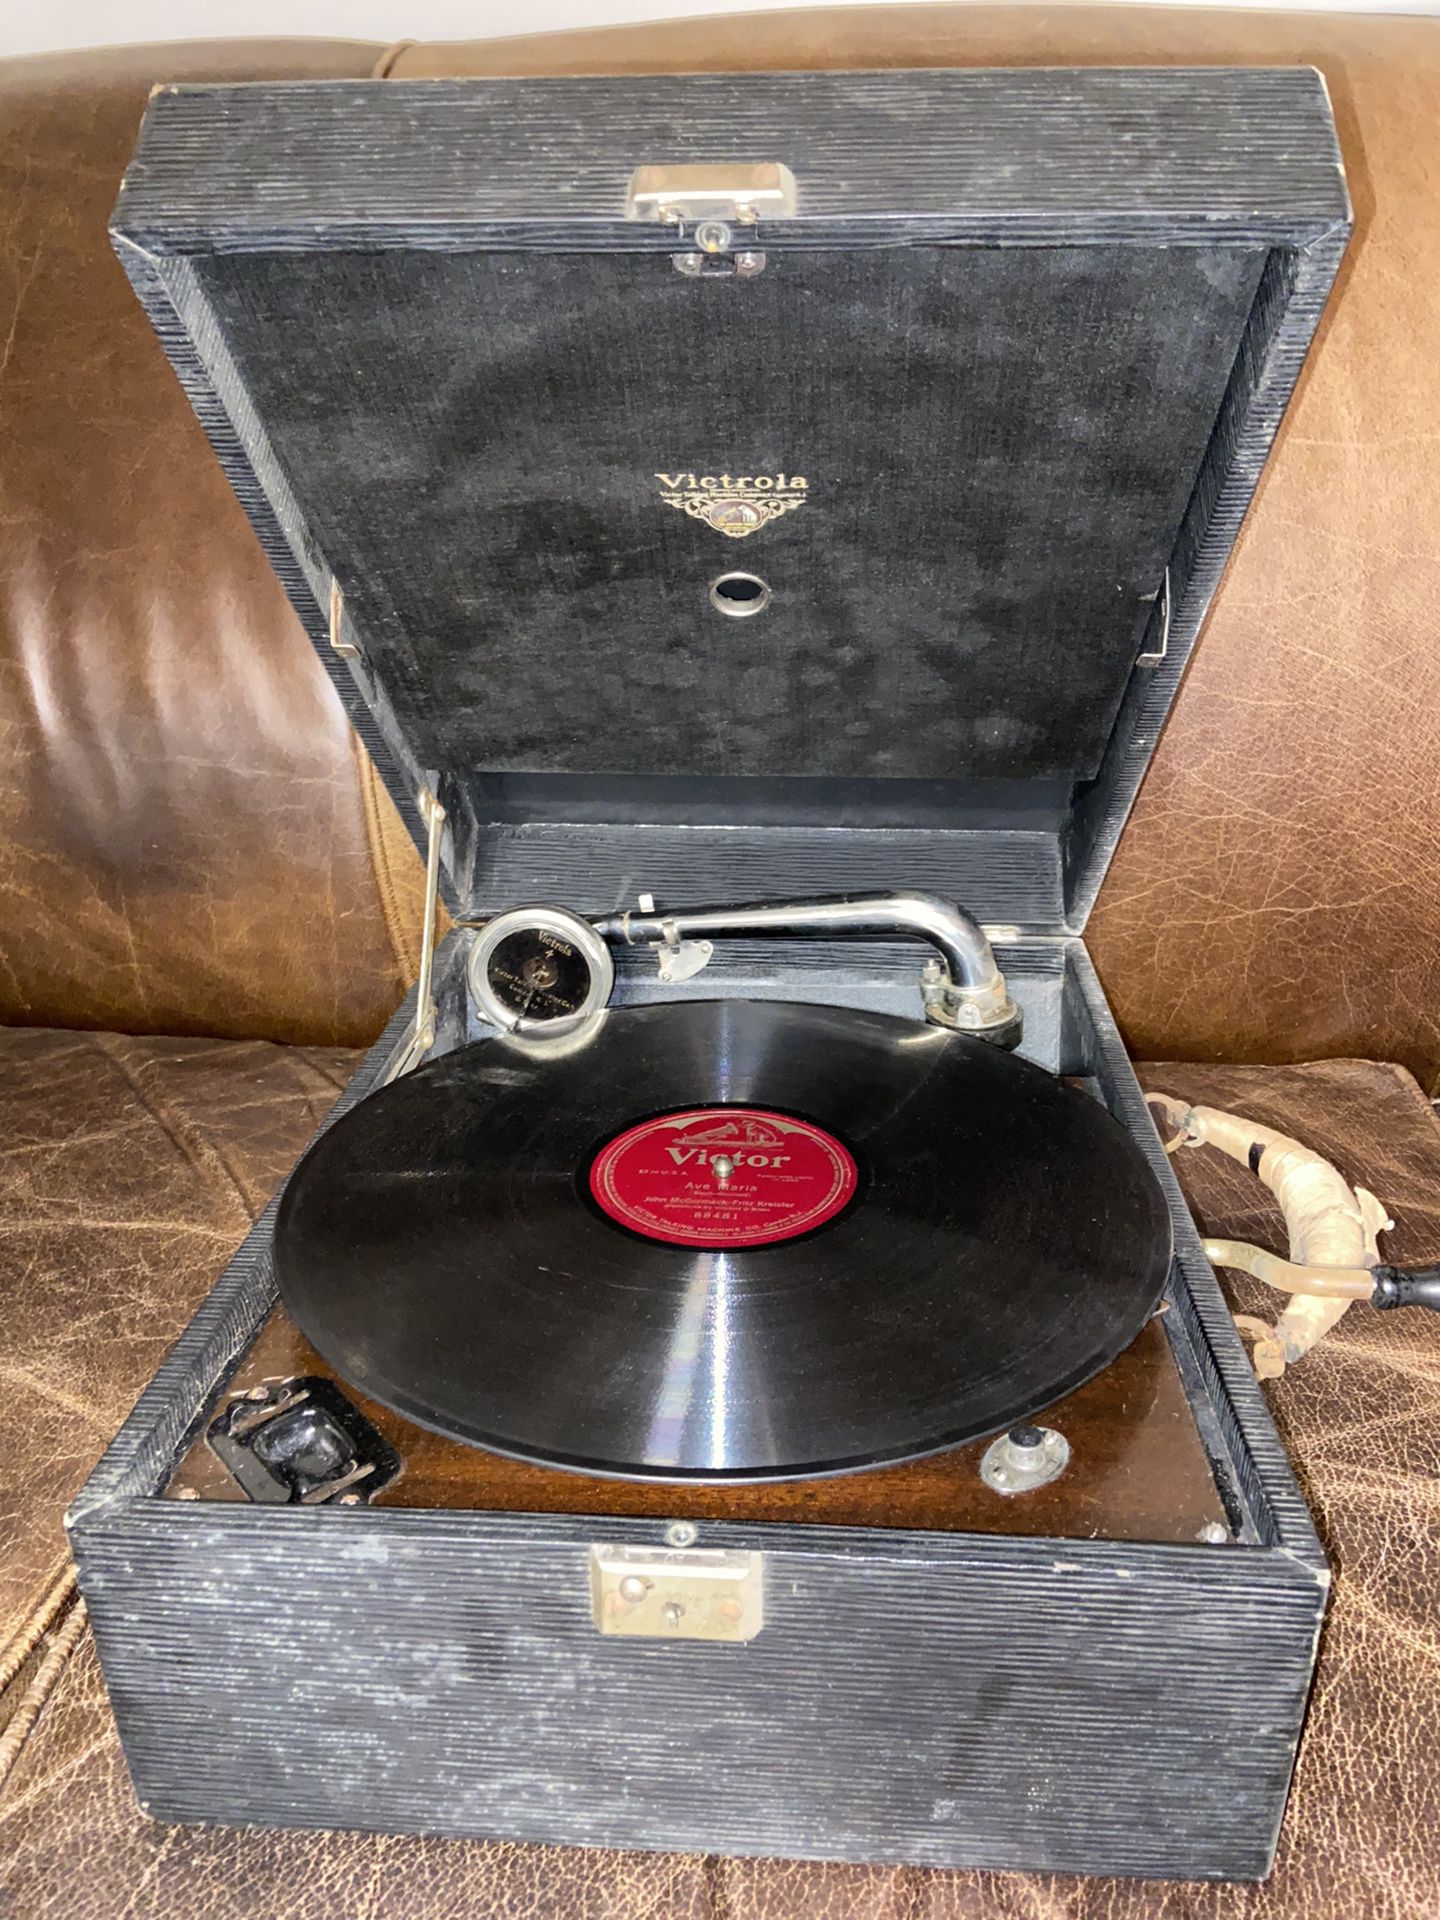 Antique Victrola Suitcase Record Player Beautiful condition. Works great Will even include record Ave Marie